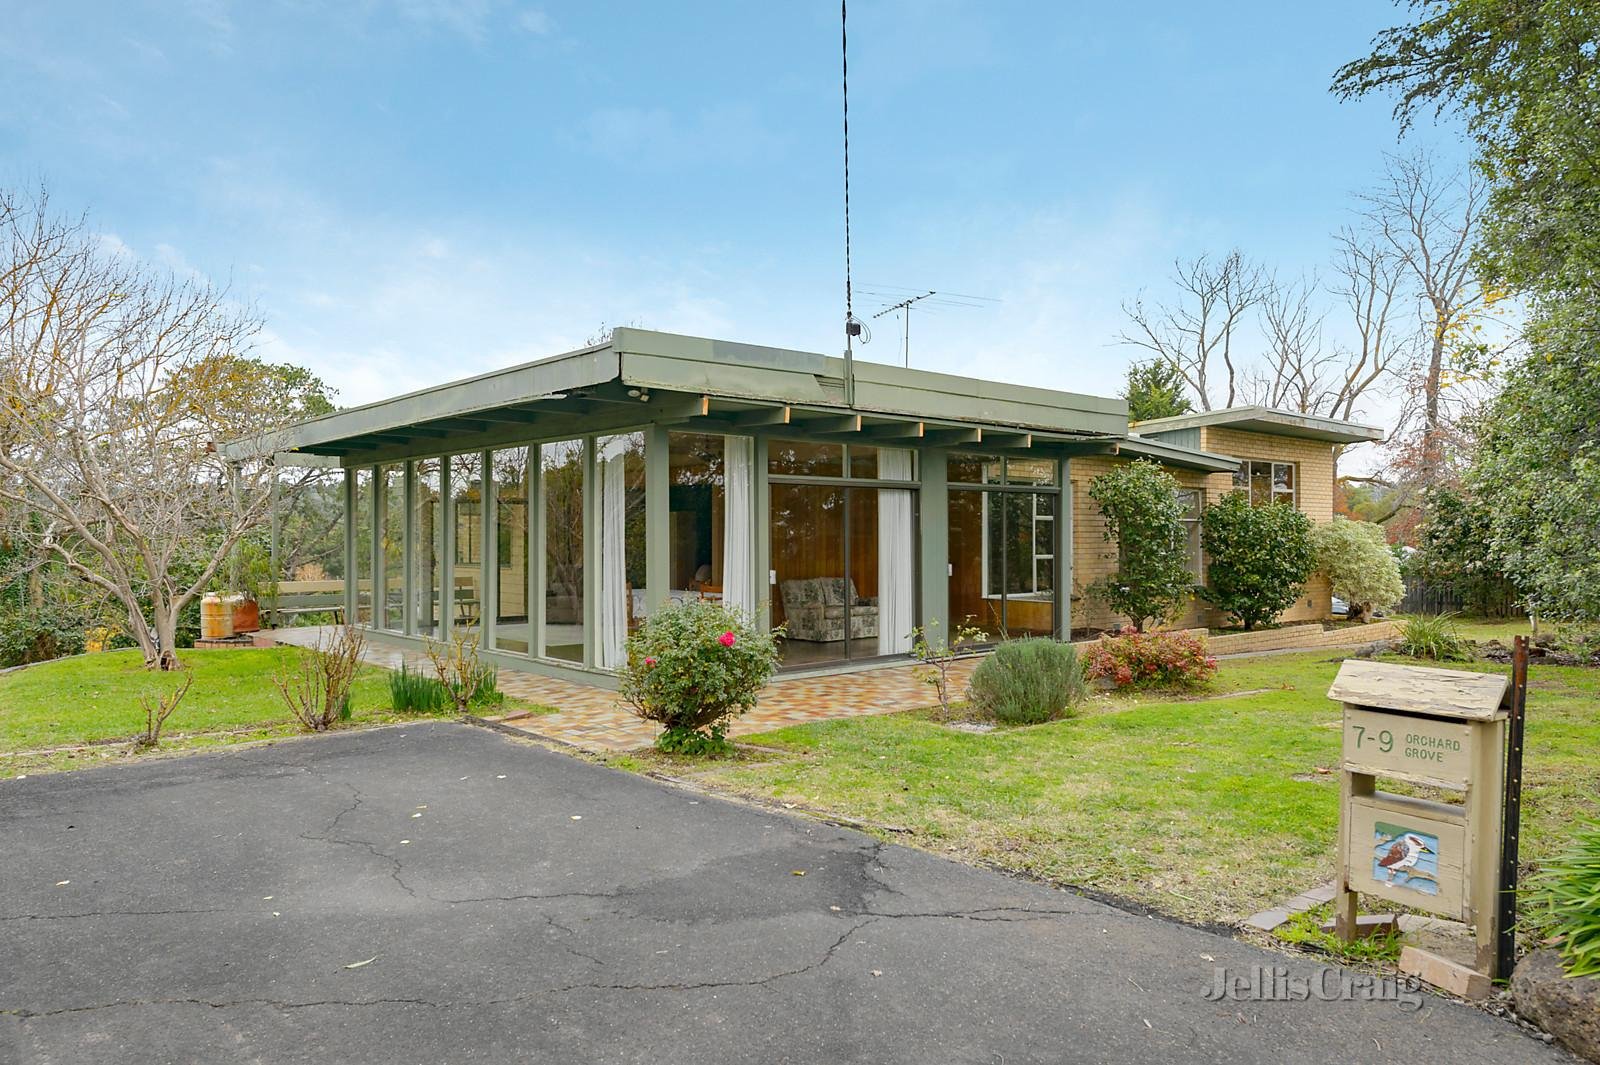 7-9 Orchard Grove, Warrandyte image 1